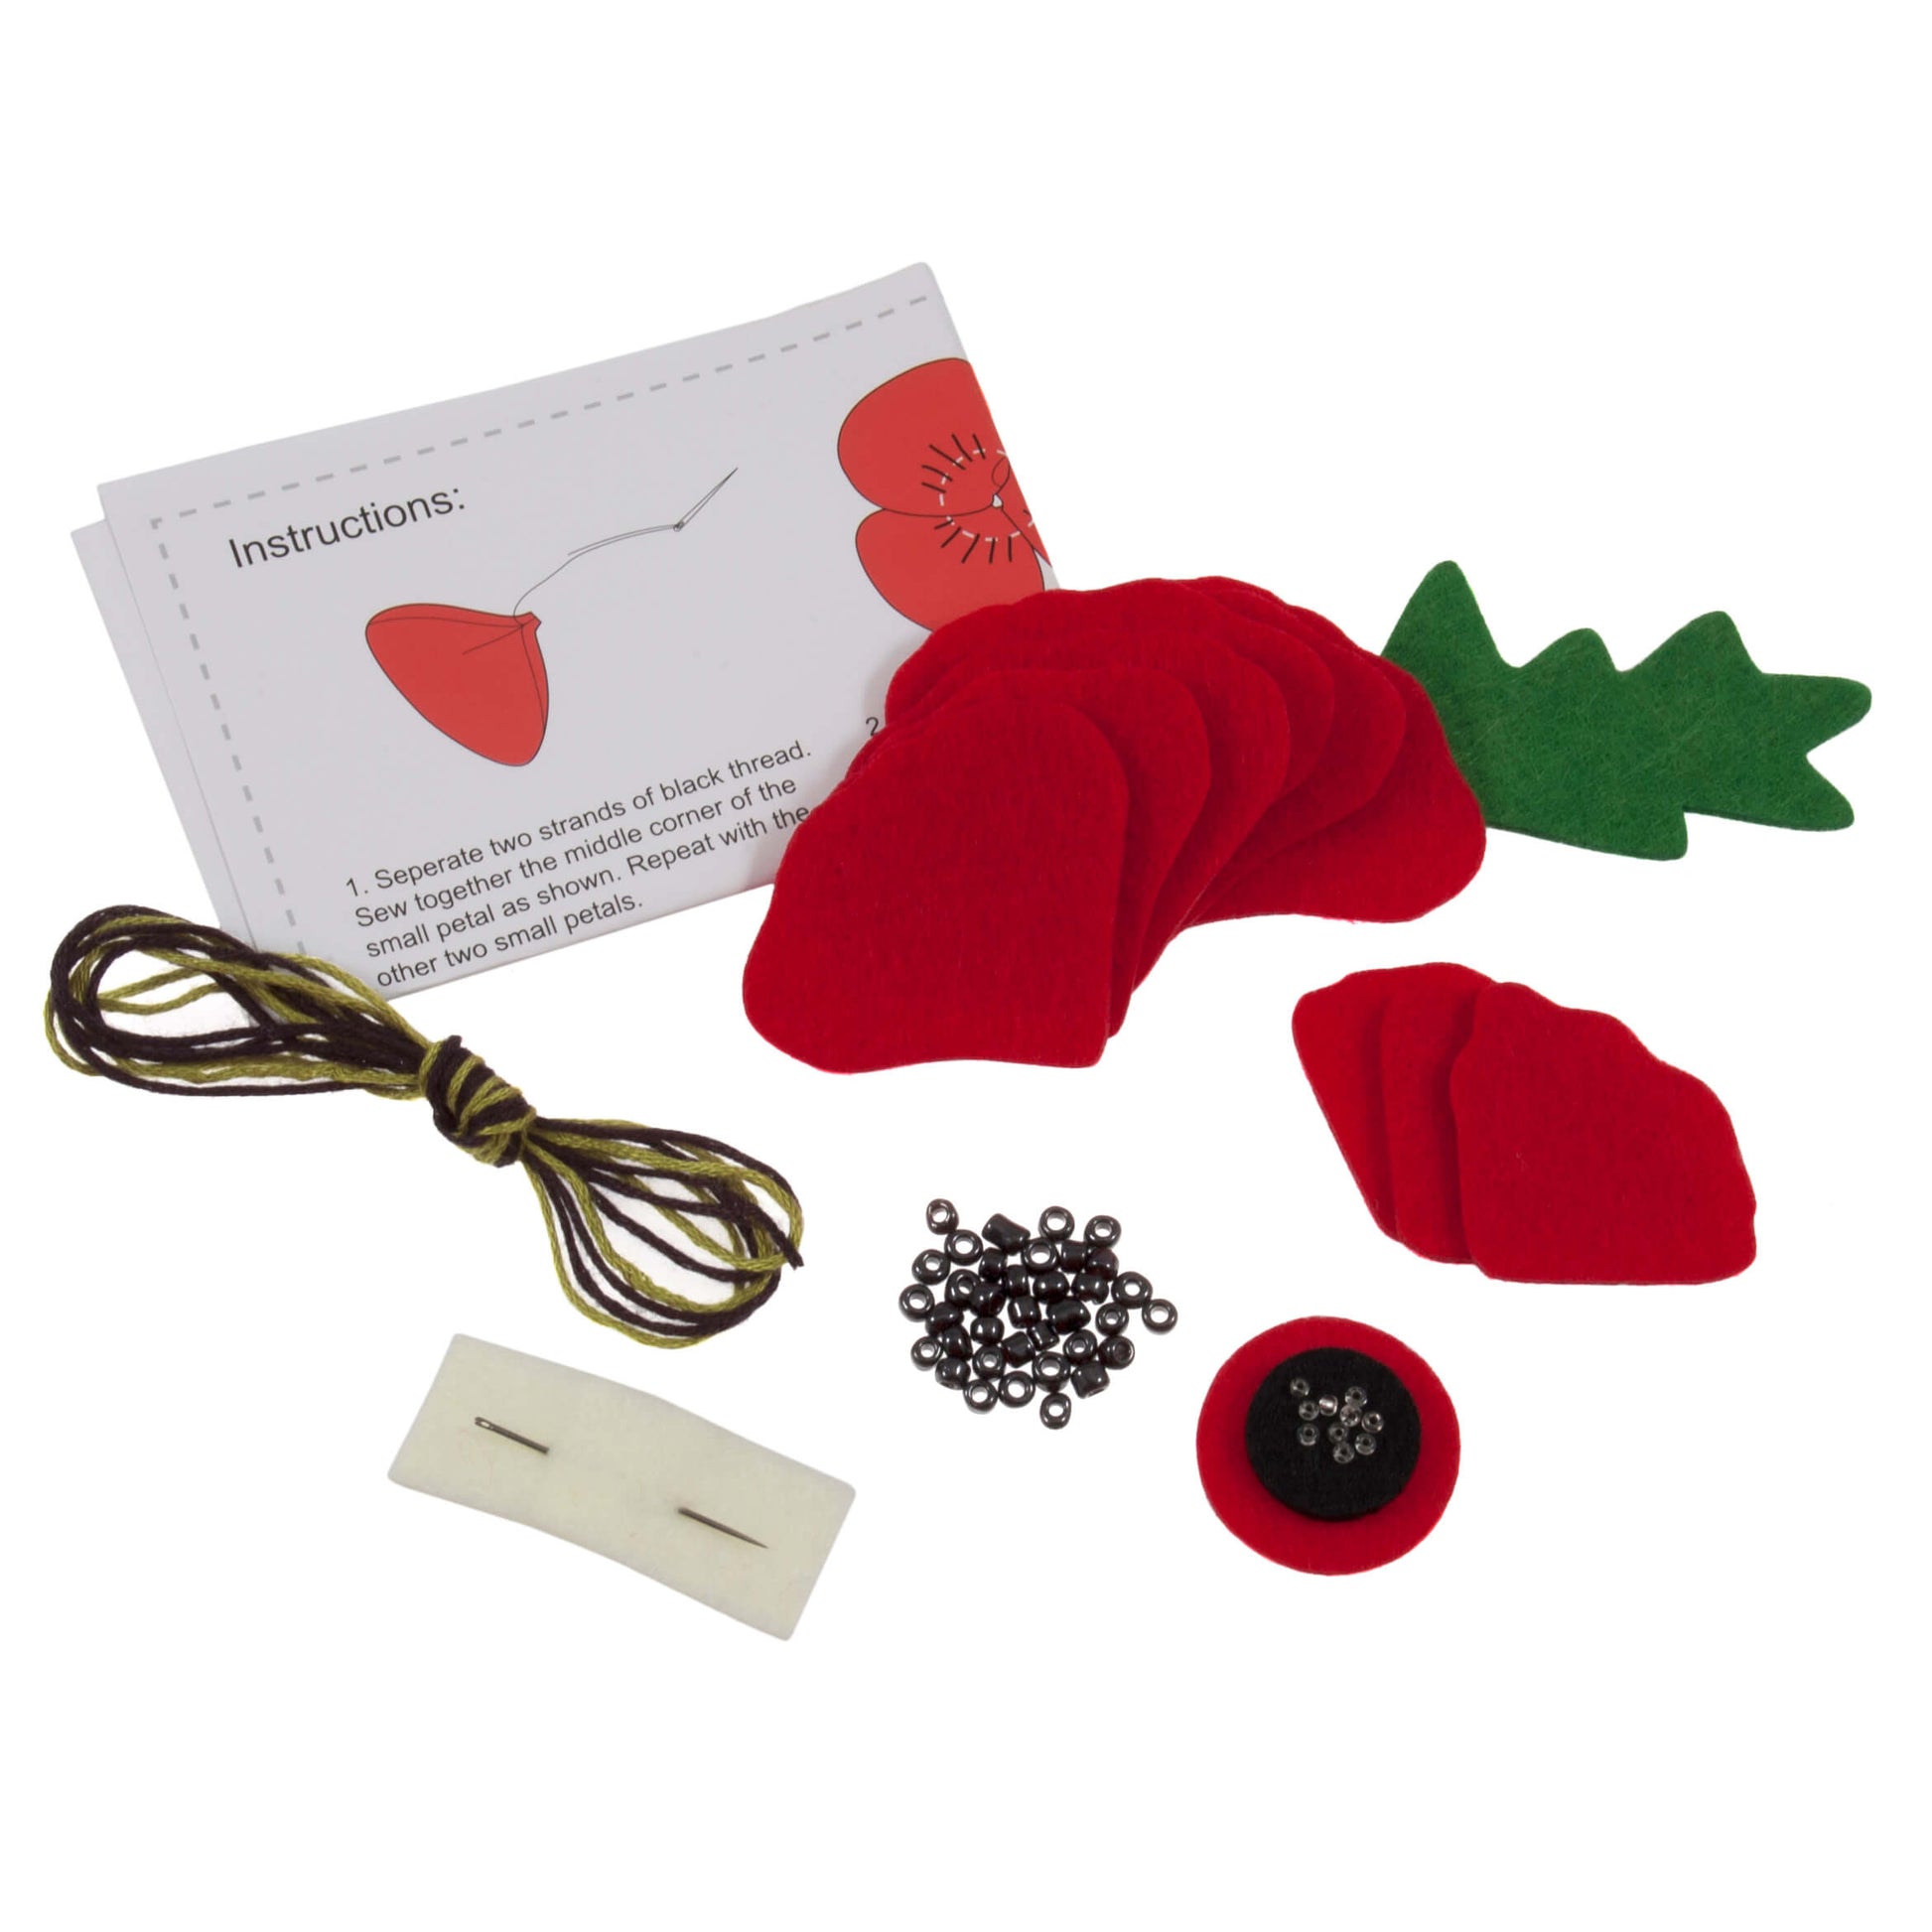 A photo of a felt poppy with instructions on how to make it.